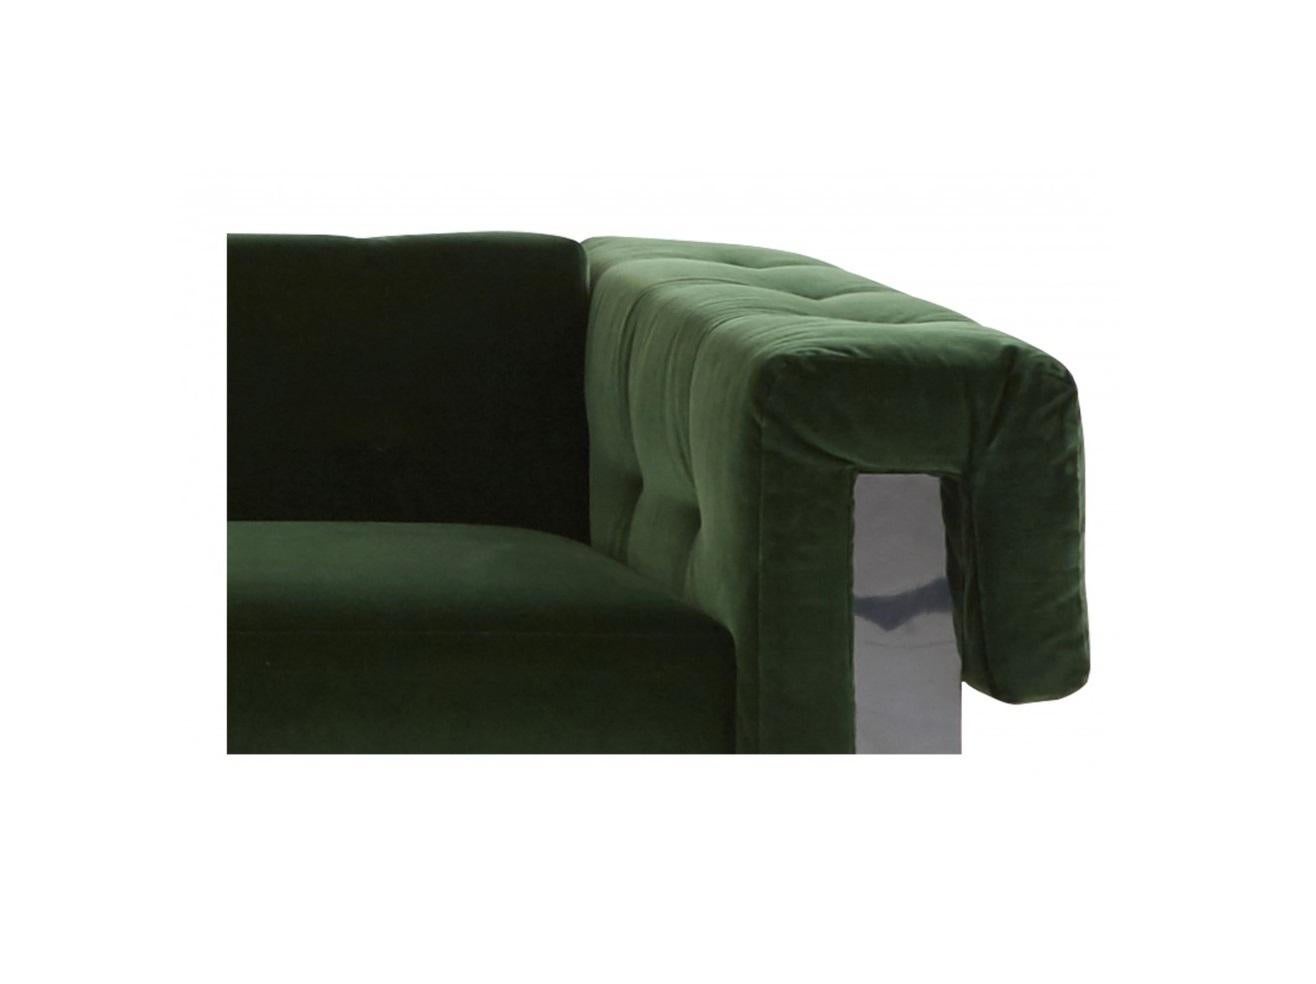 American Milo Baughman Button-Tufted Green & Chrome Wrapped Sofa For Sale